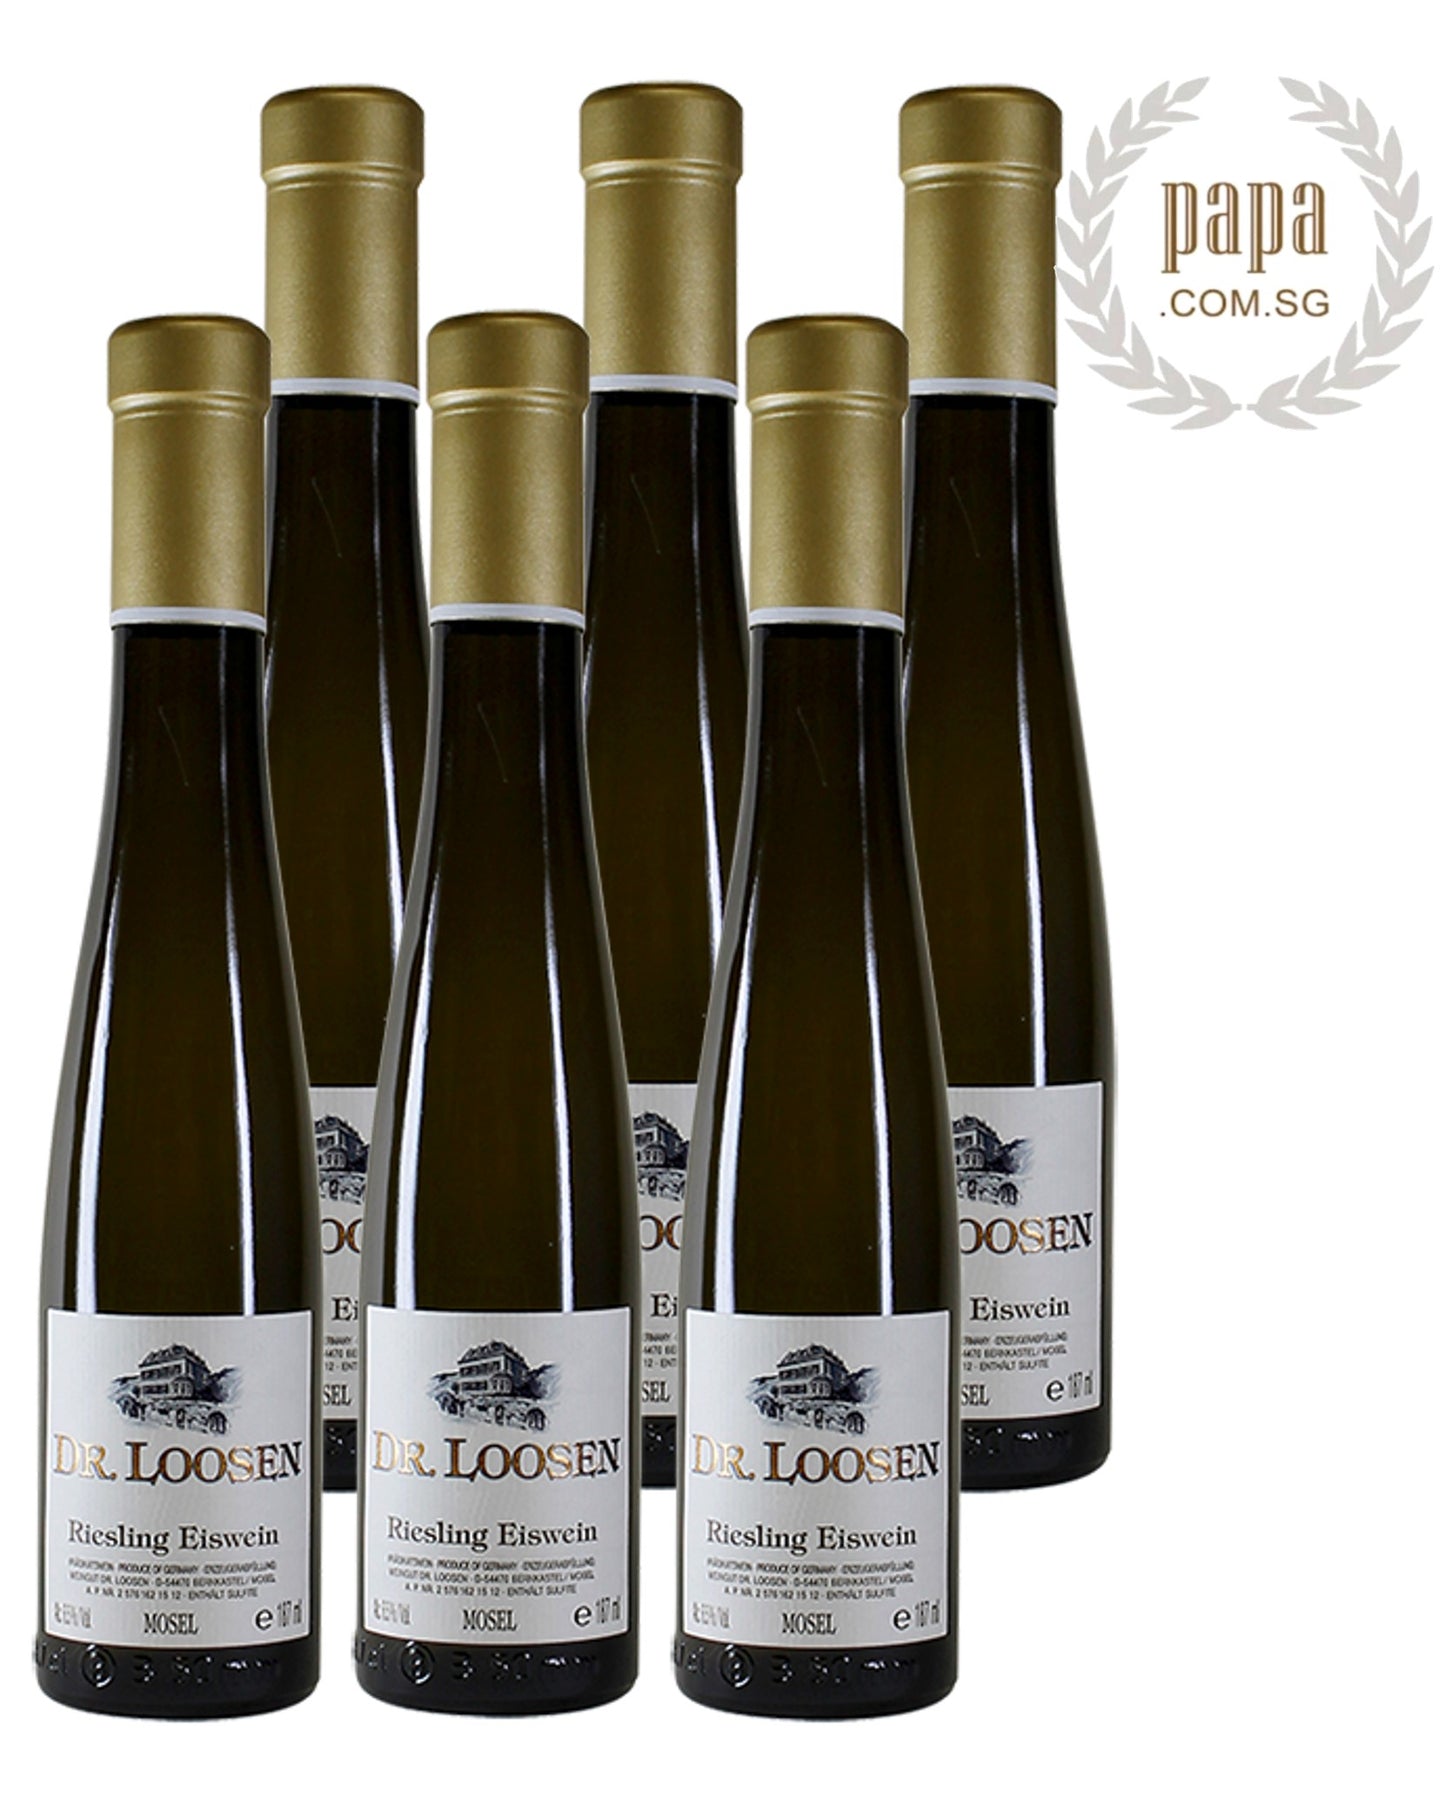 Dr Loosen - Riesling Eiswein Tube 2020